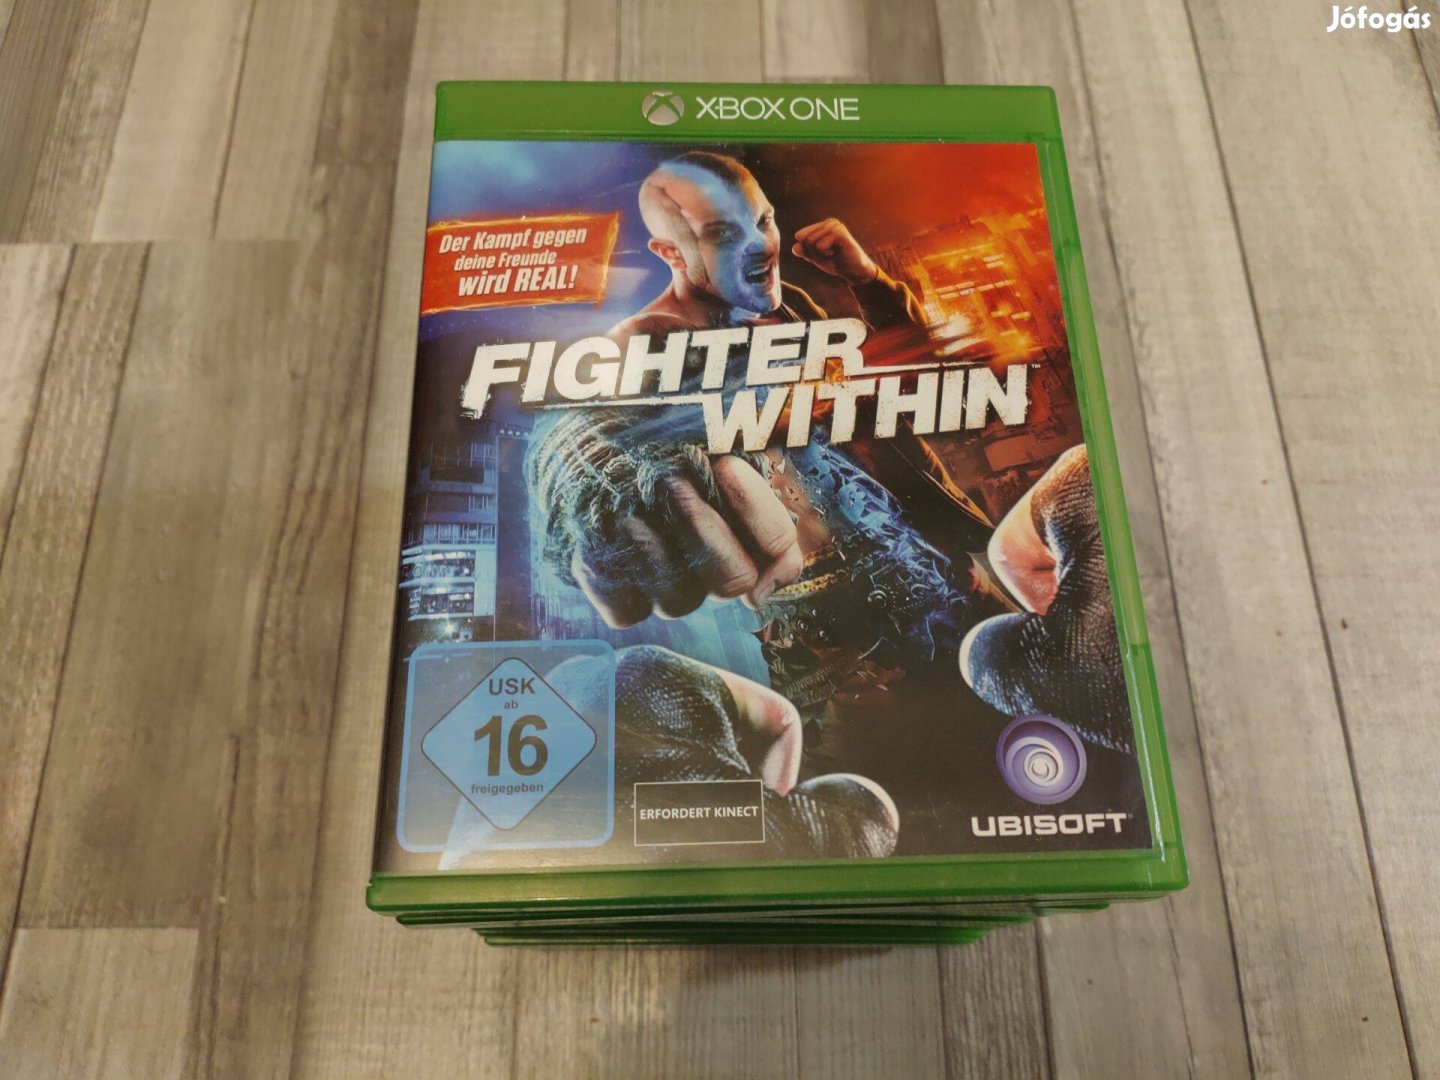 3+1Akció Xbox One(S/X) : Kinect Fighter Within